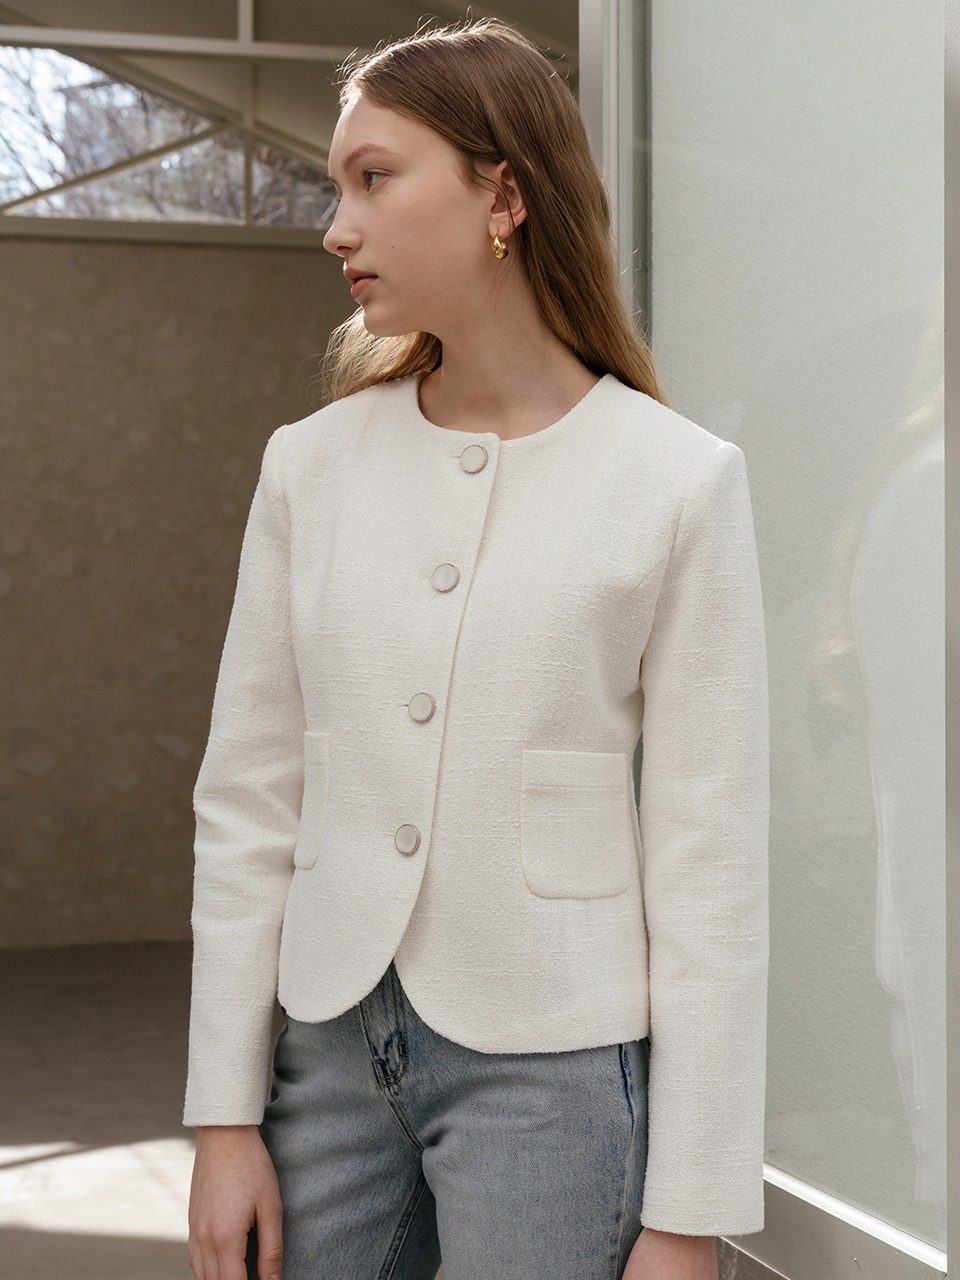 Merry classic tweed jacket in White